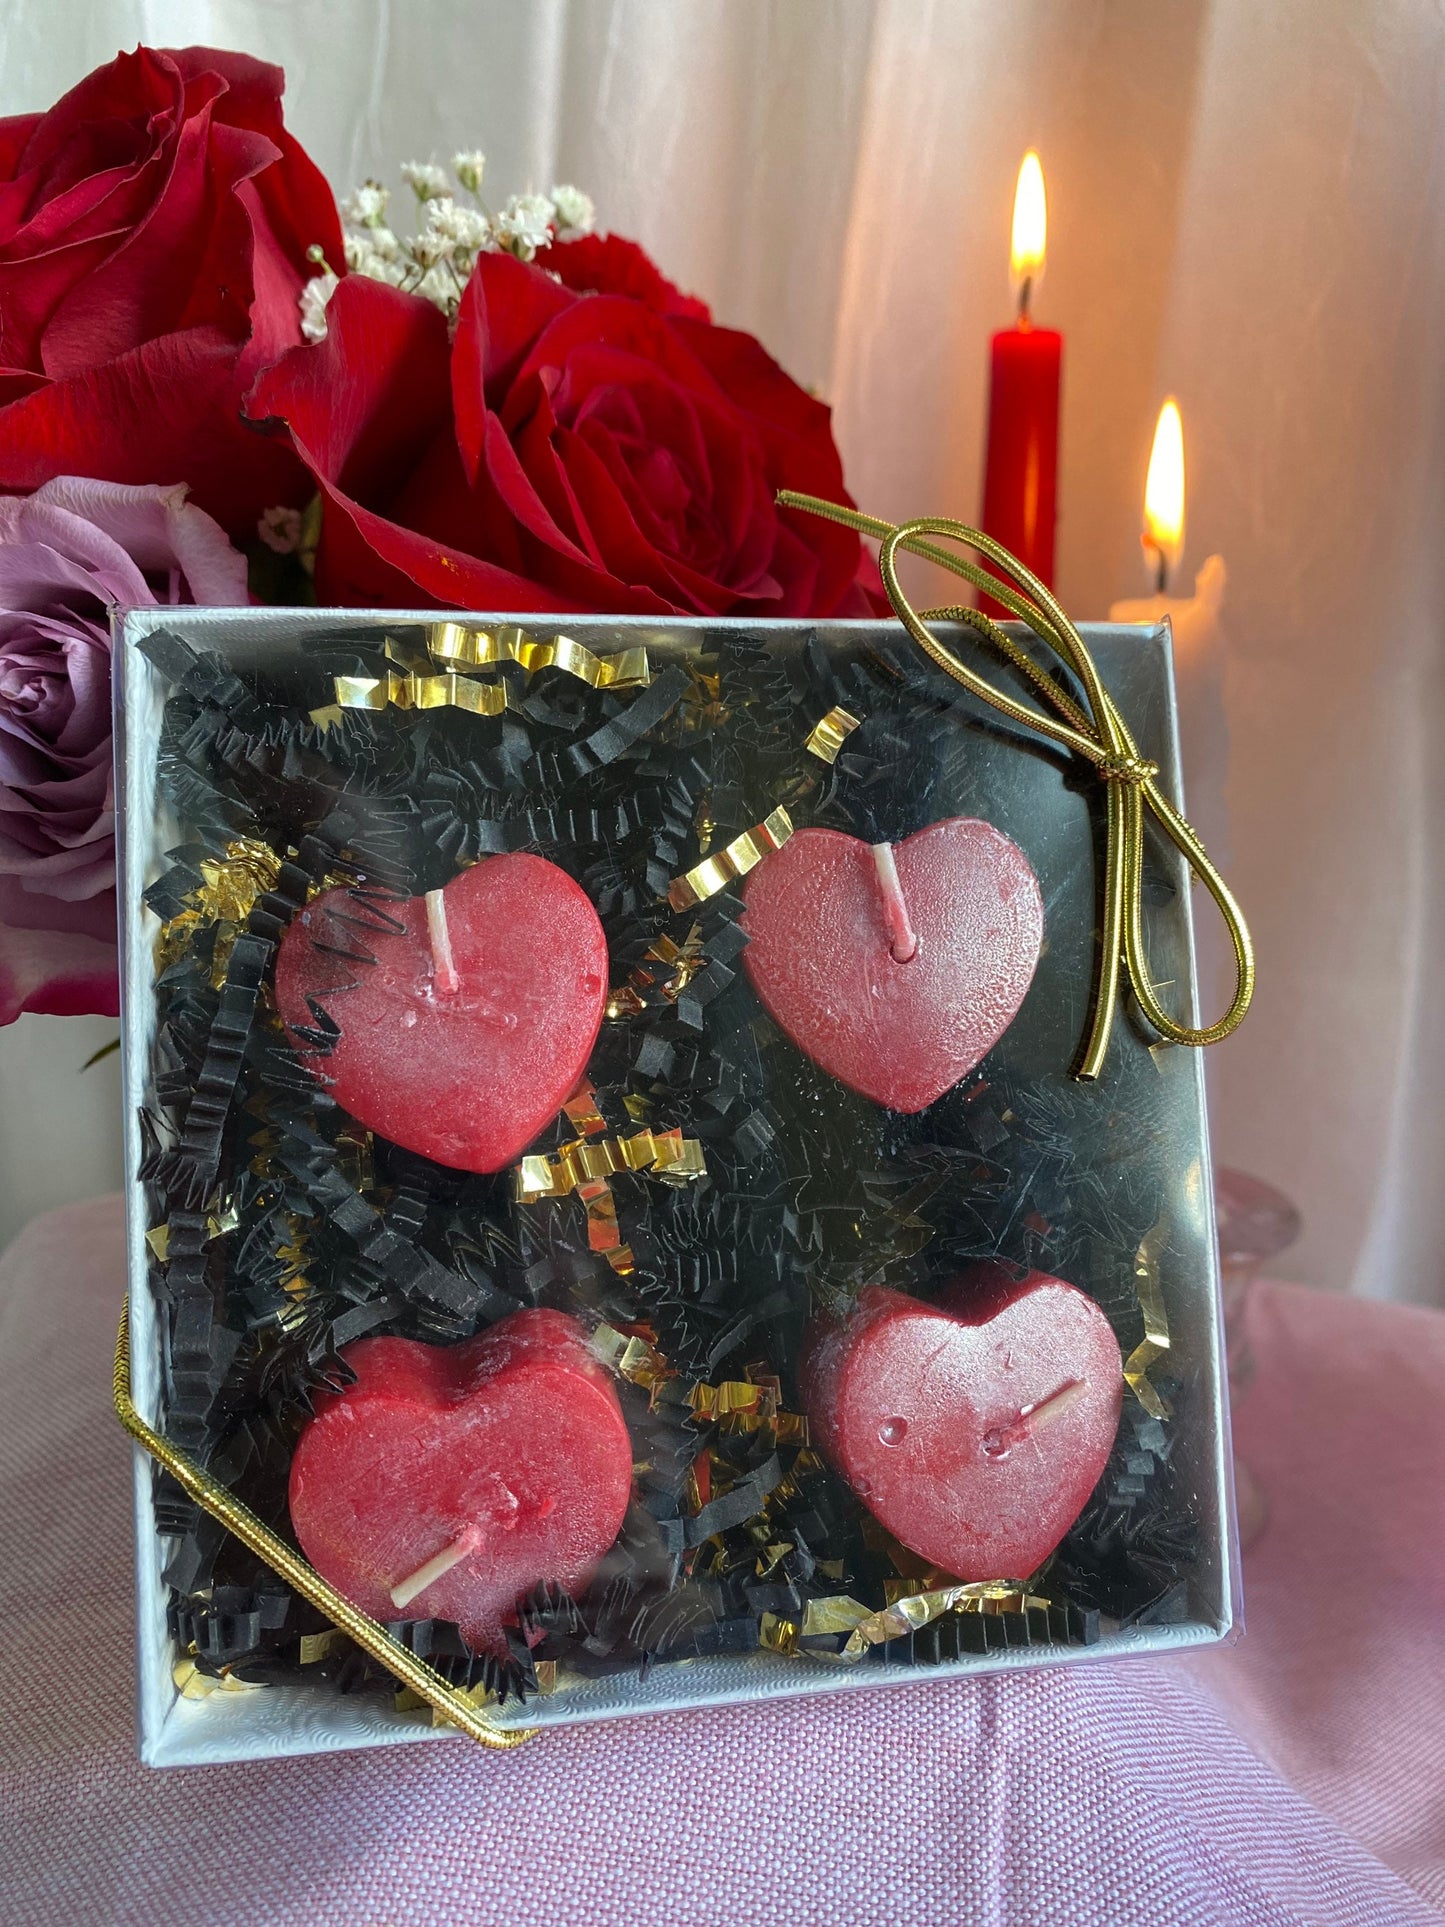 Heart Tealight Candles in Gift Box + Love + Passion